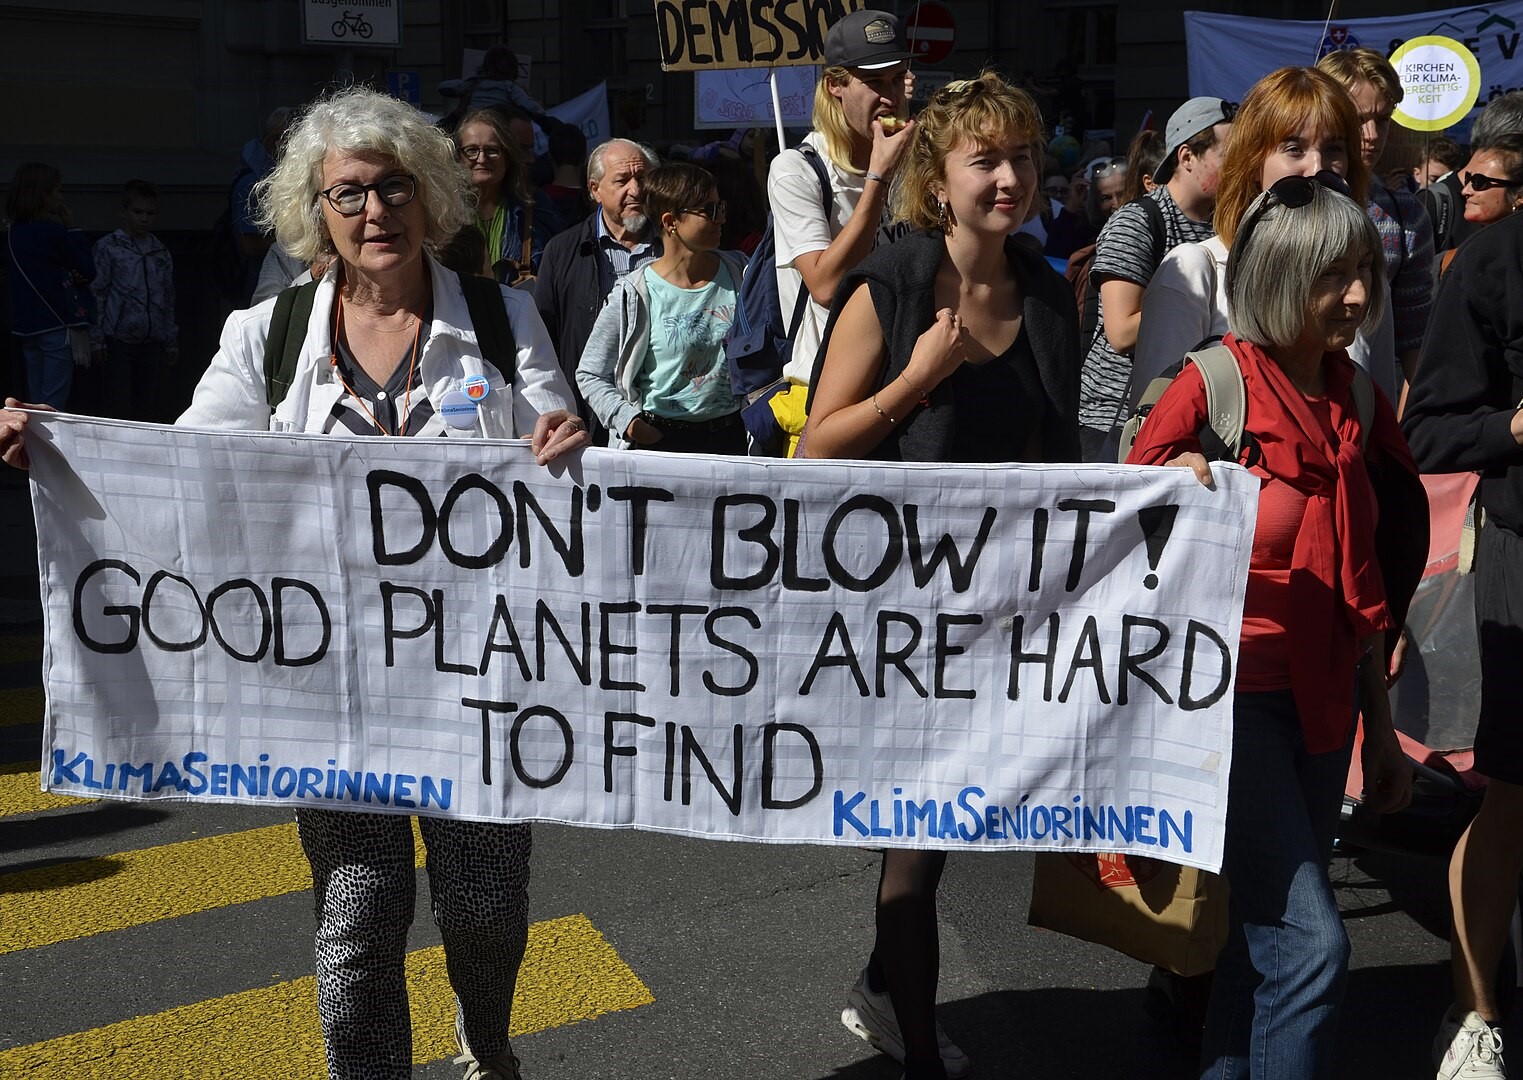 An elderly woman holding up a banner at a climate demonstration in Bern: "Don't blow it! Good planets are hard to find. KlimaSeniorinnen"